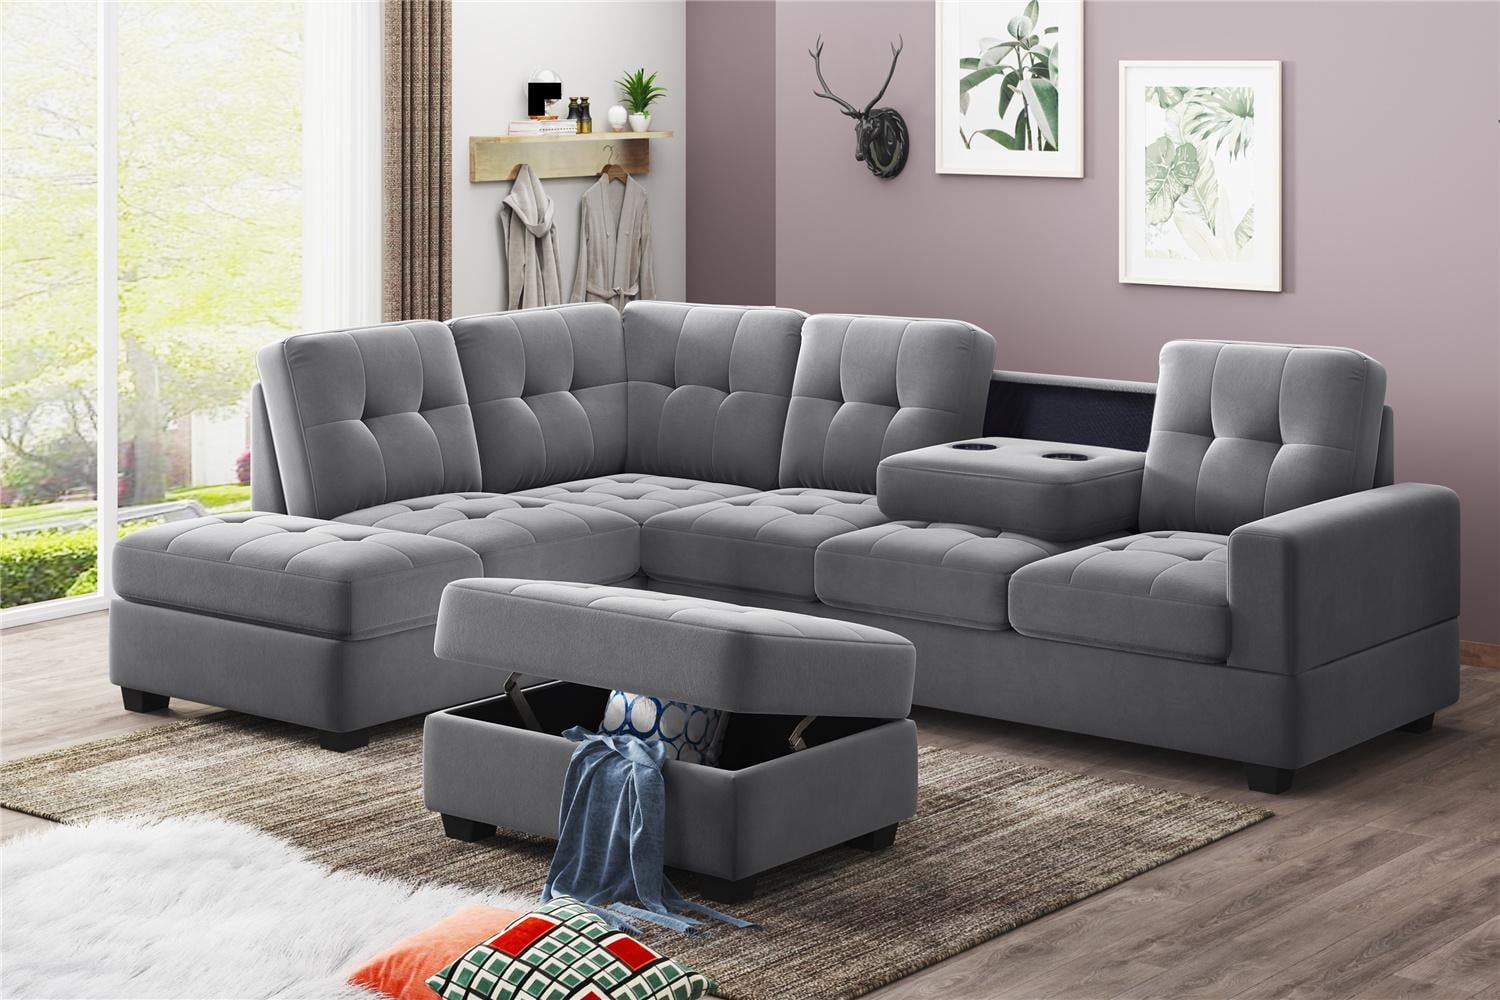 Contemporary 7pcs Sectional Modern Sofa Microsuede Reversible Chaise Ottoman USA 